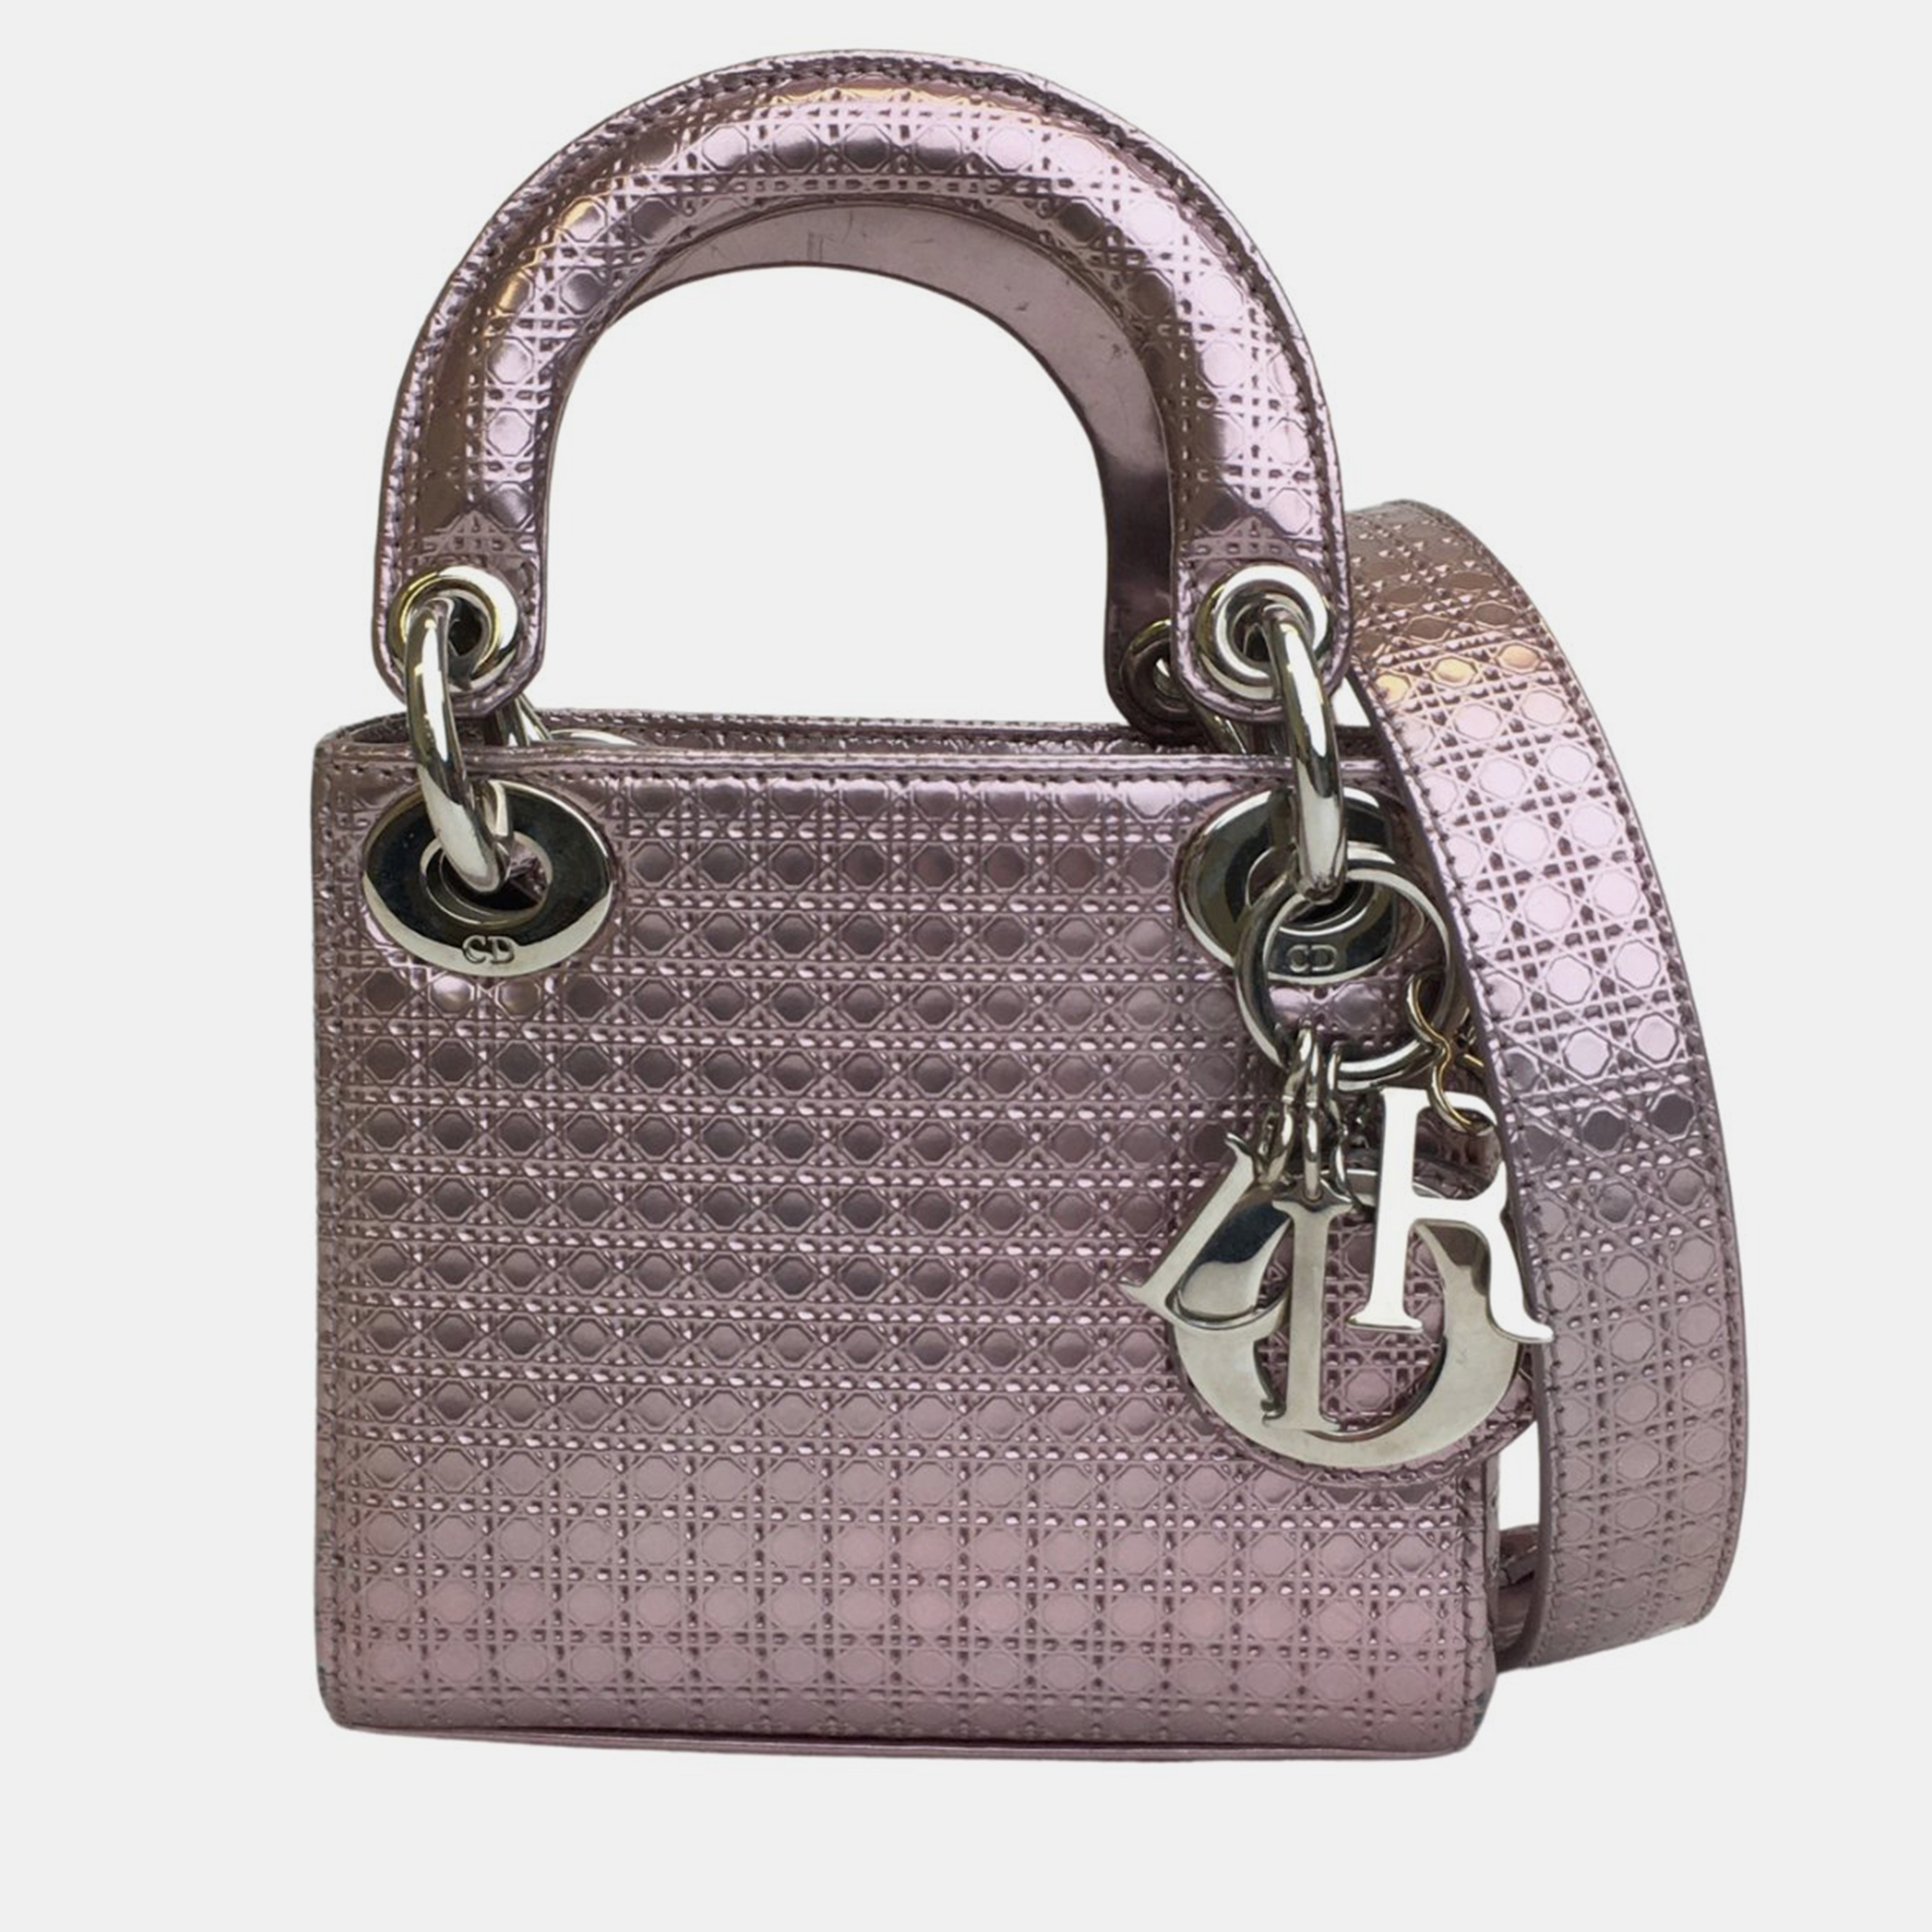 Dior pink microcannage leather micro lady dior tote bag